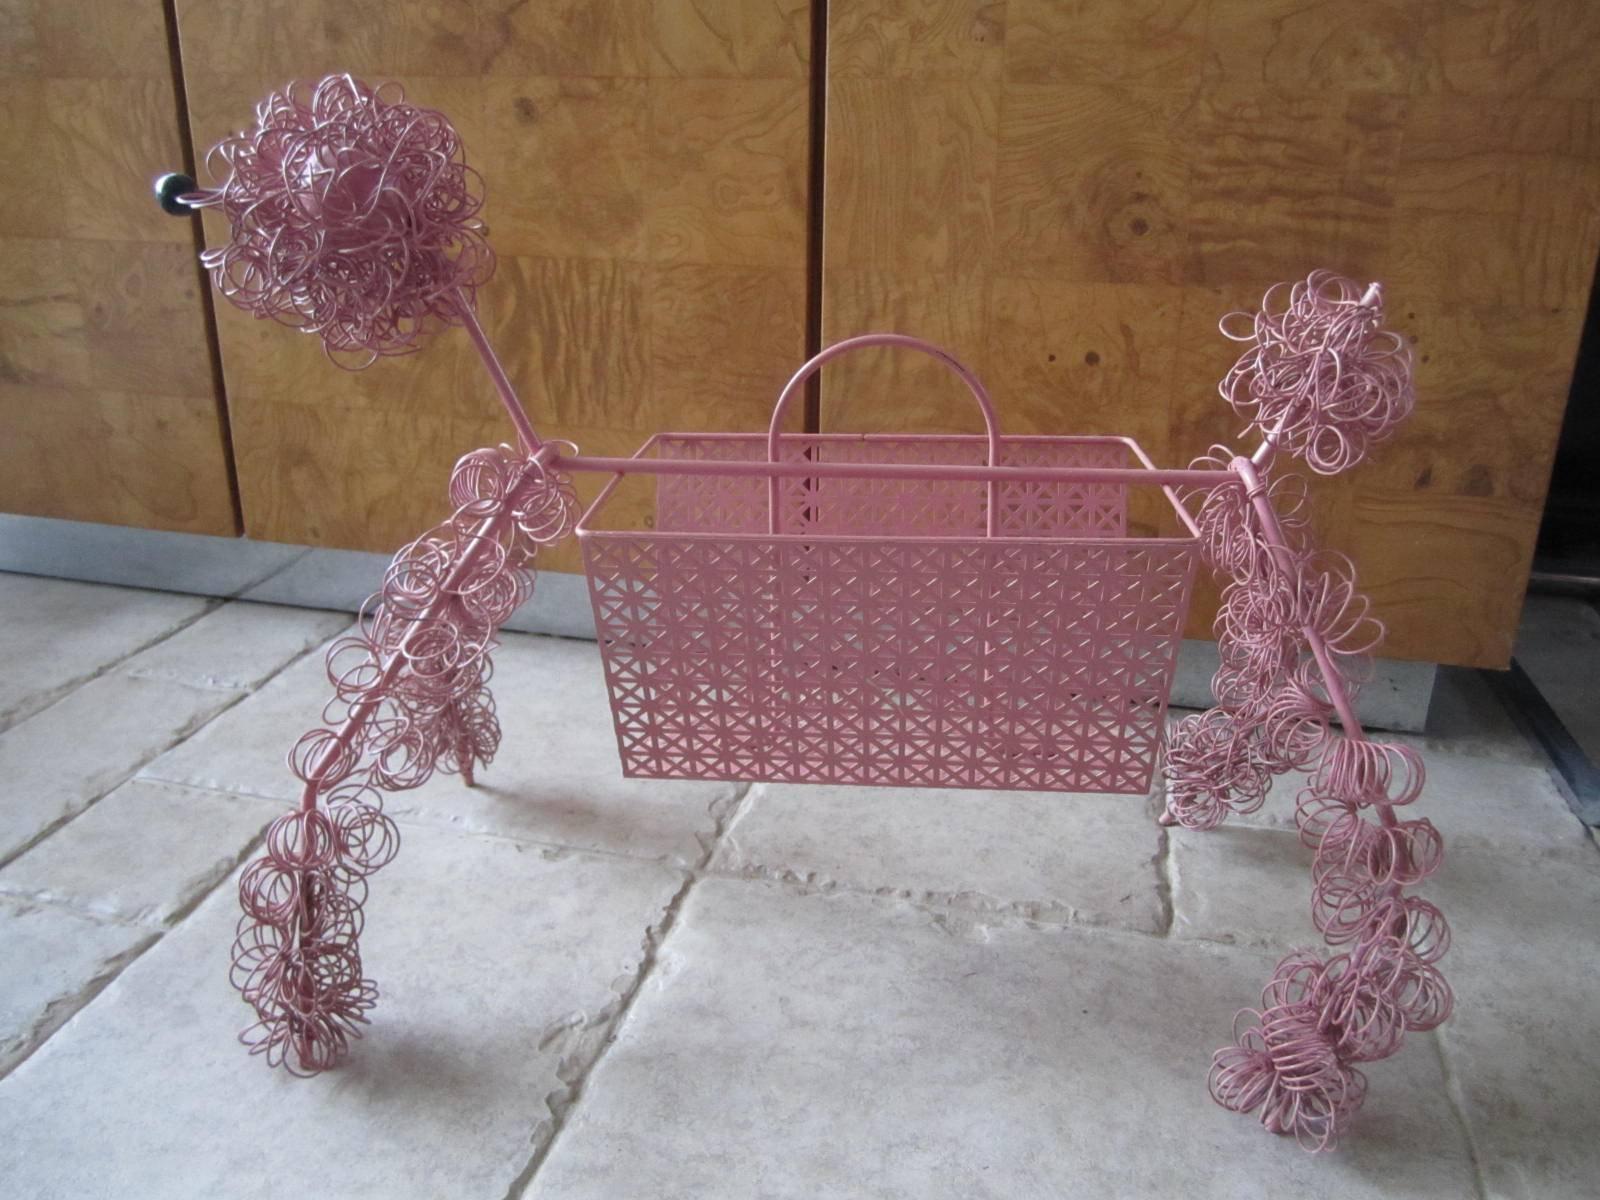 Fun Whimsical Weinberg 1950s Pink Poodle Magazine Rack In Good Condition For Sale In Pemberton, NJ